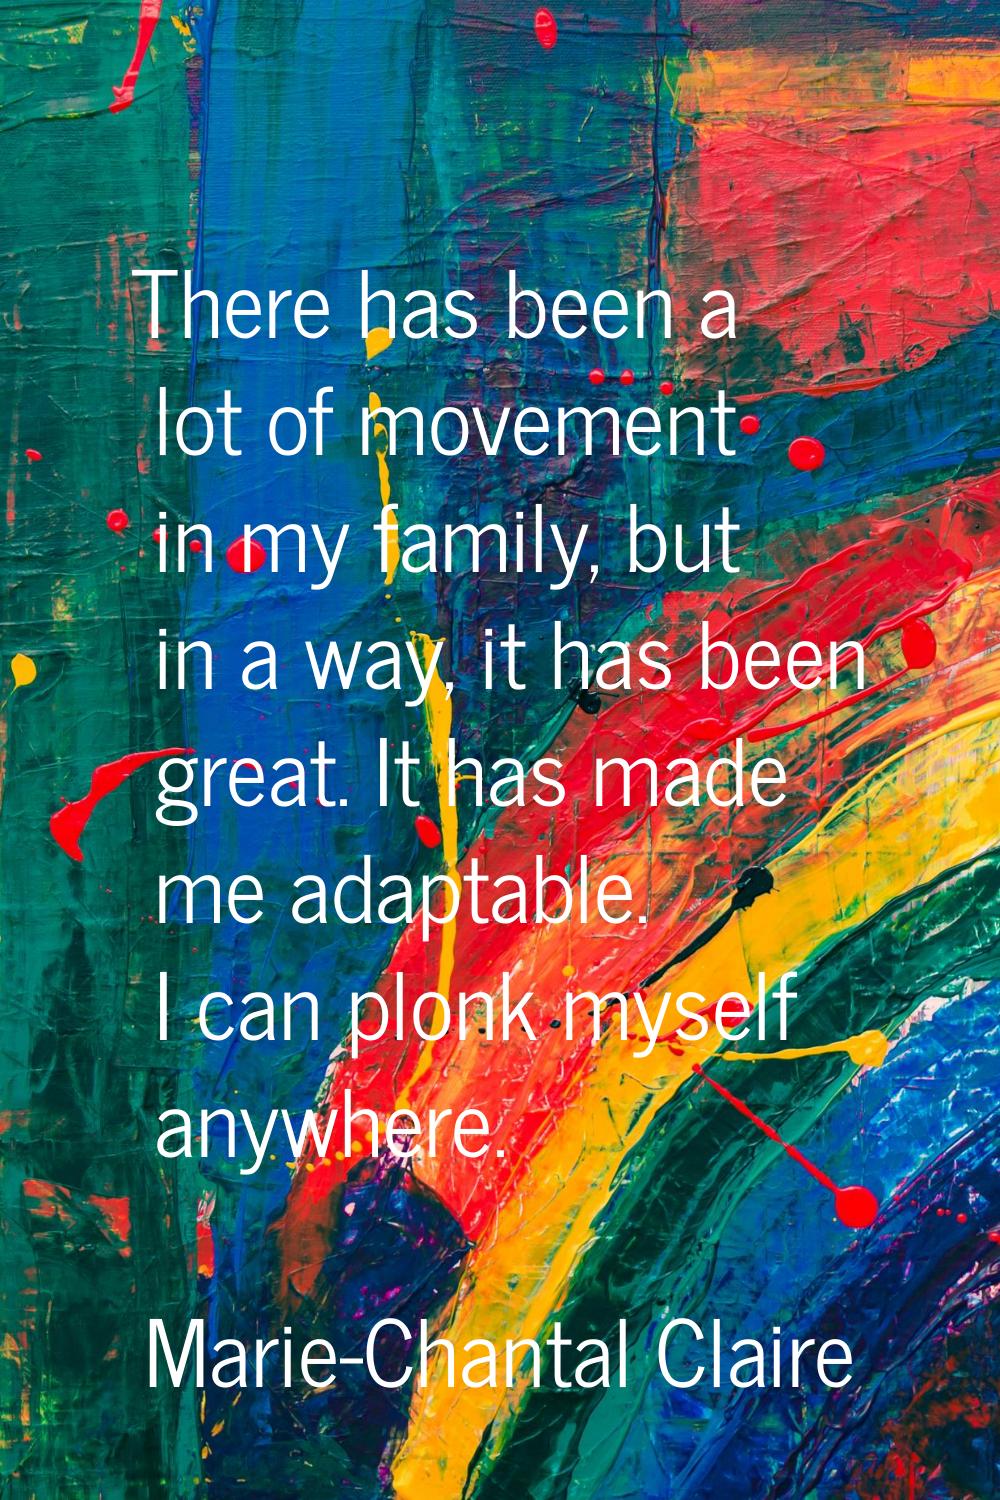 There has been a lot of movement in my family, but in a way, it has been great. It has made me adap